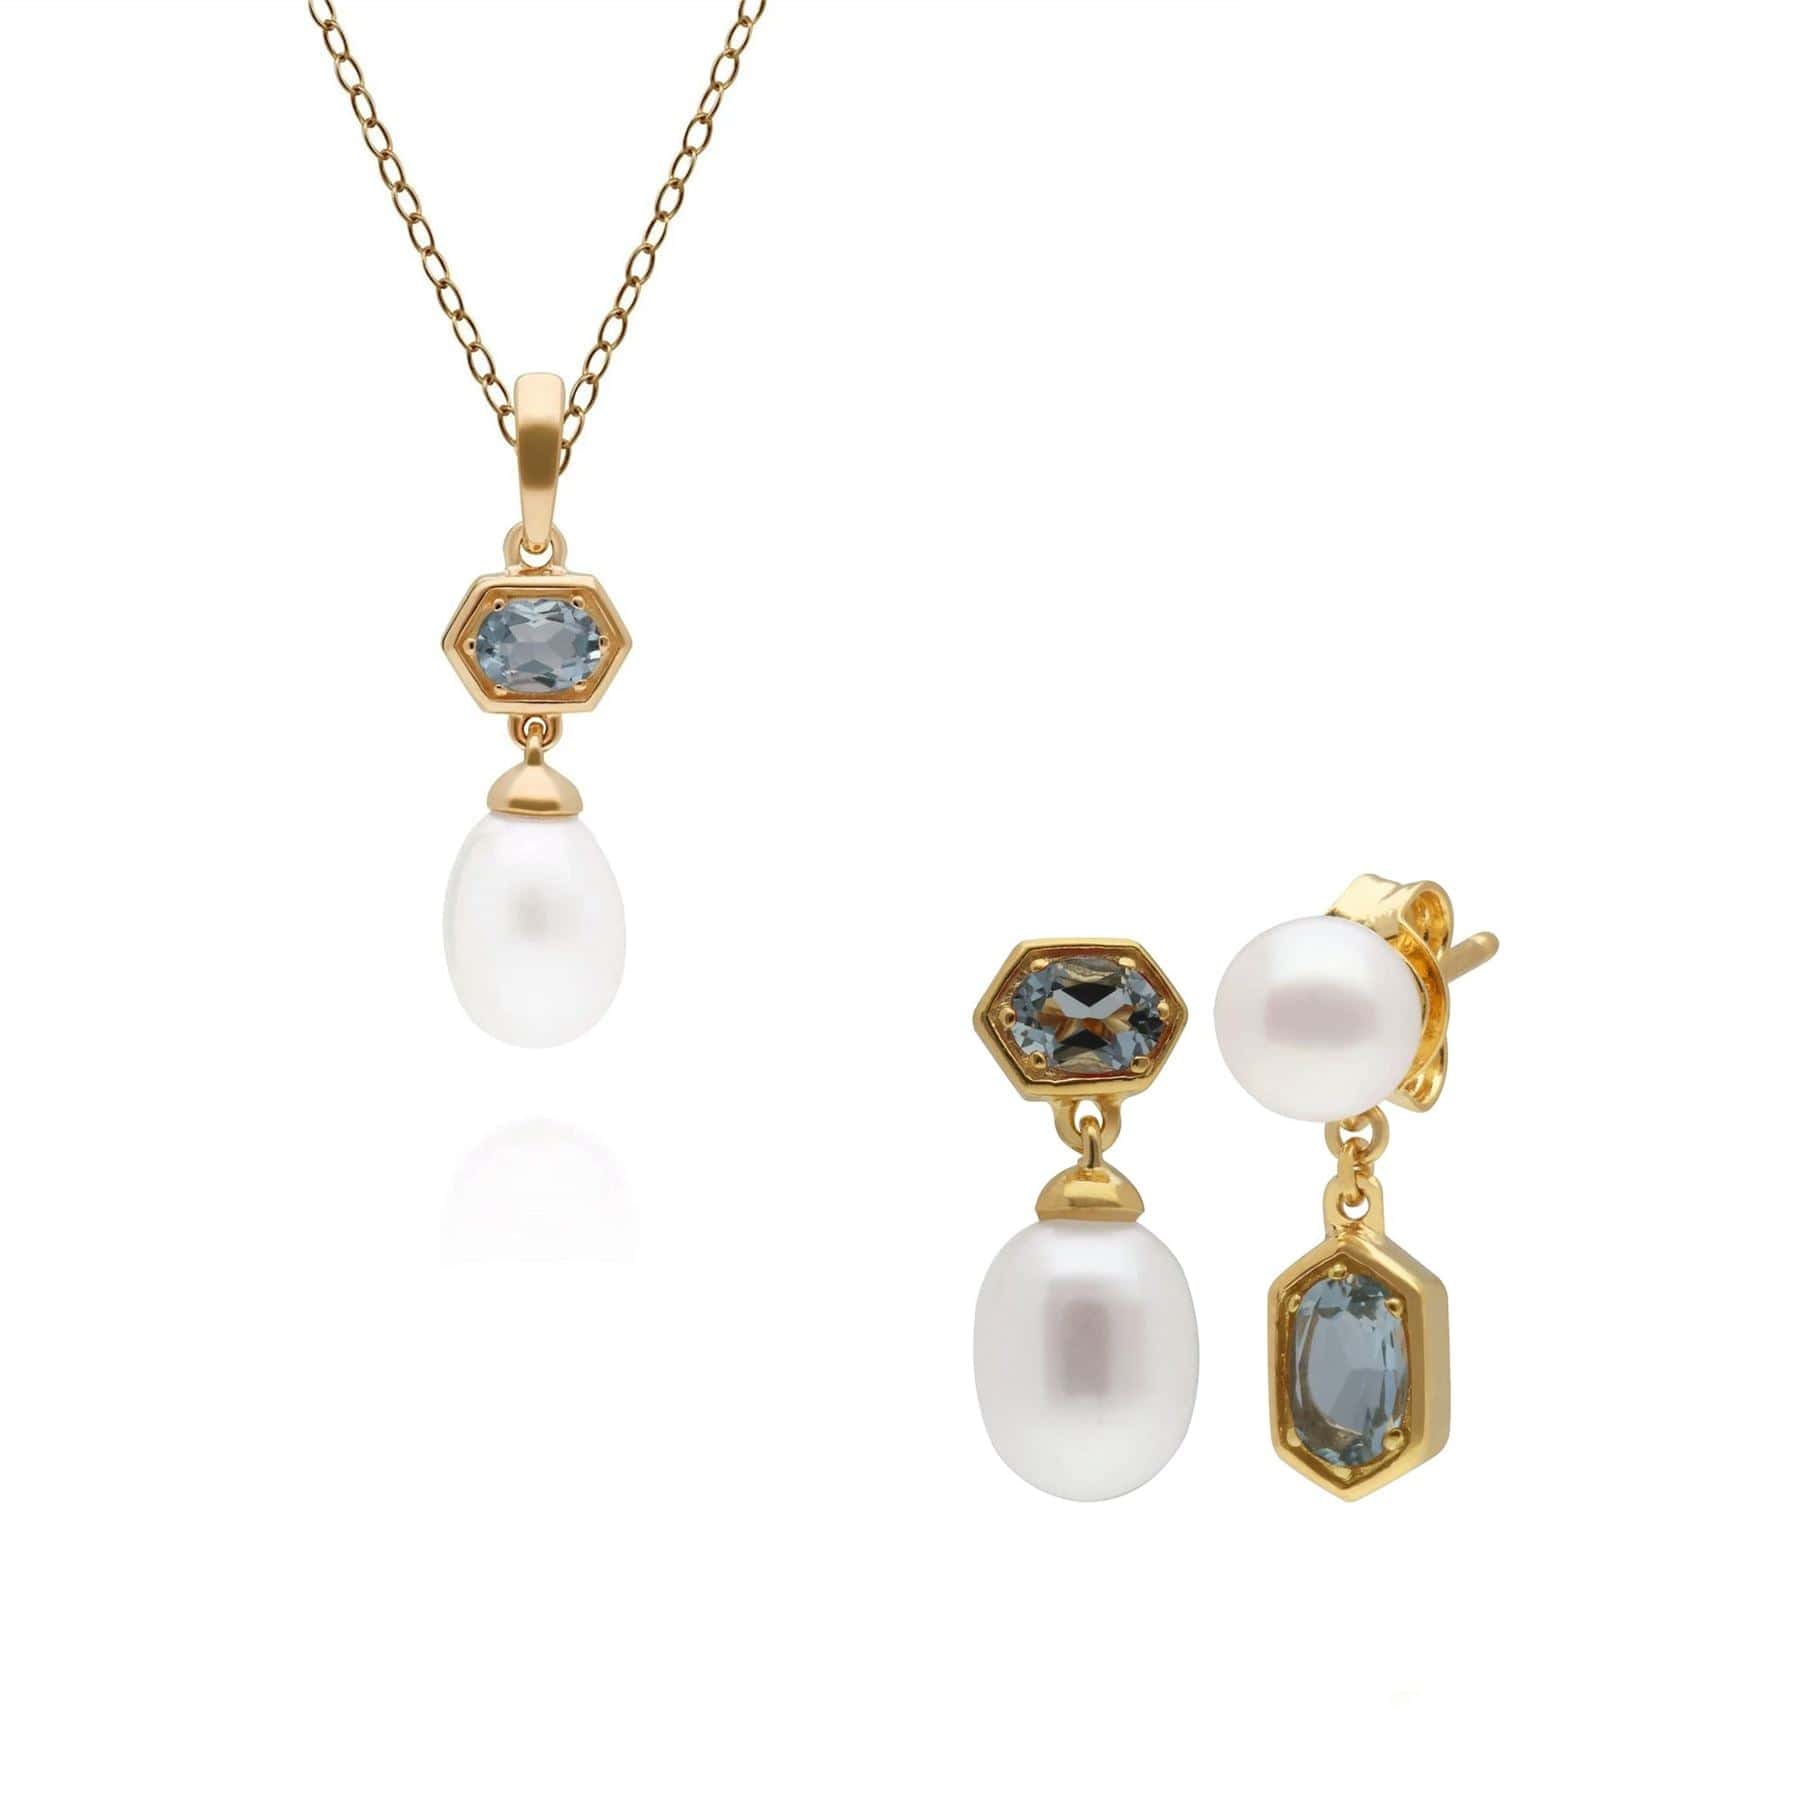 270P030204925-270E030204925 Modern Pearl & Aquamarine Pendant & Earring Set in Gold Plated Silver 1